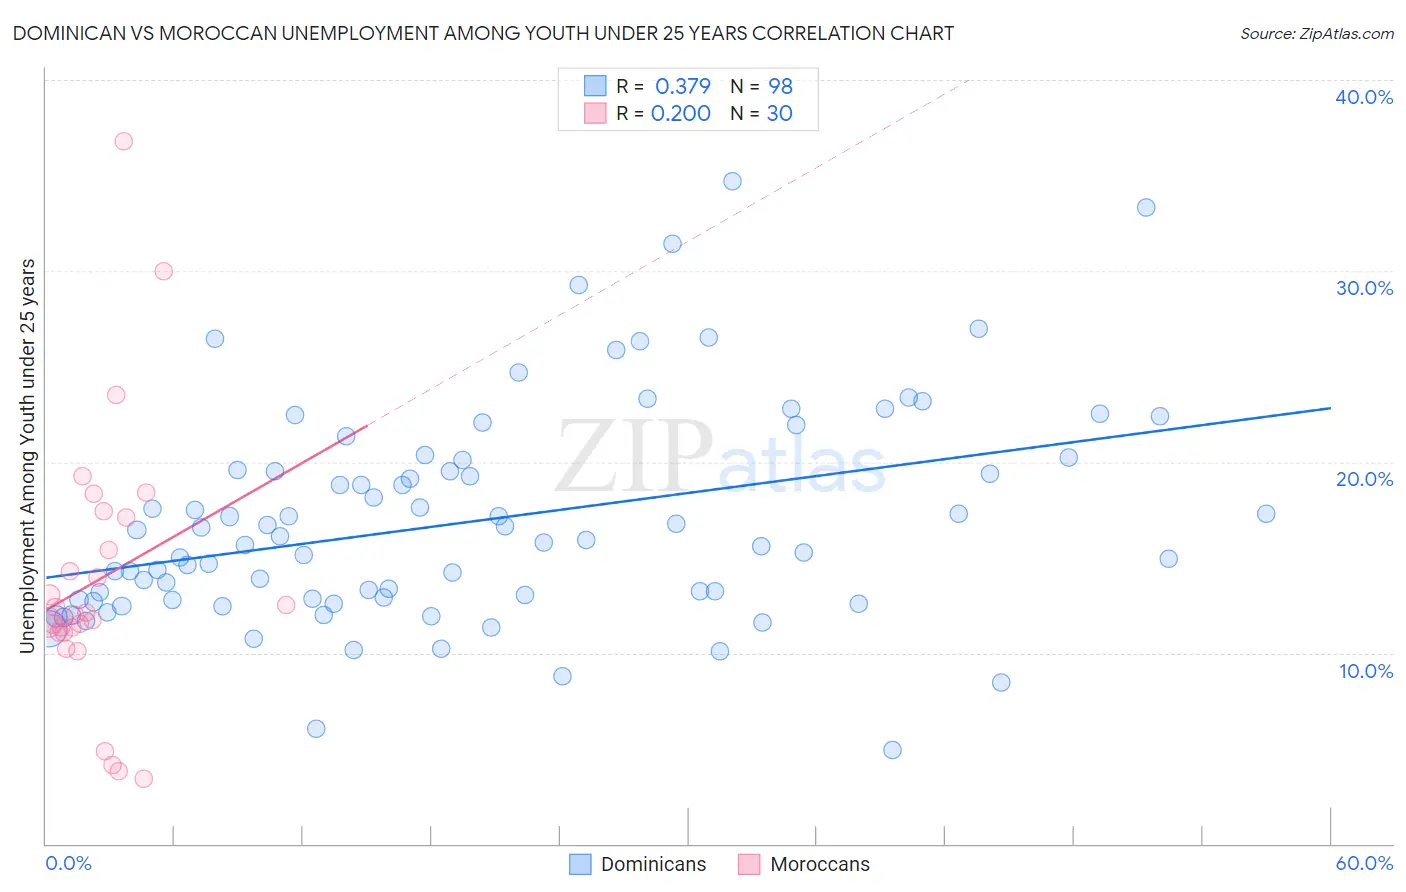 Dominican vs Moroccan Unemployment Among Youth under 25 years